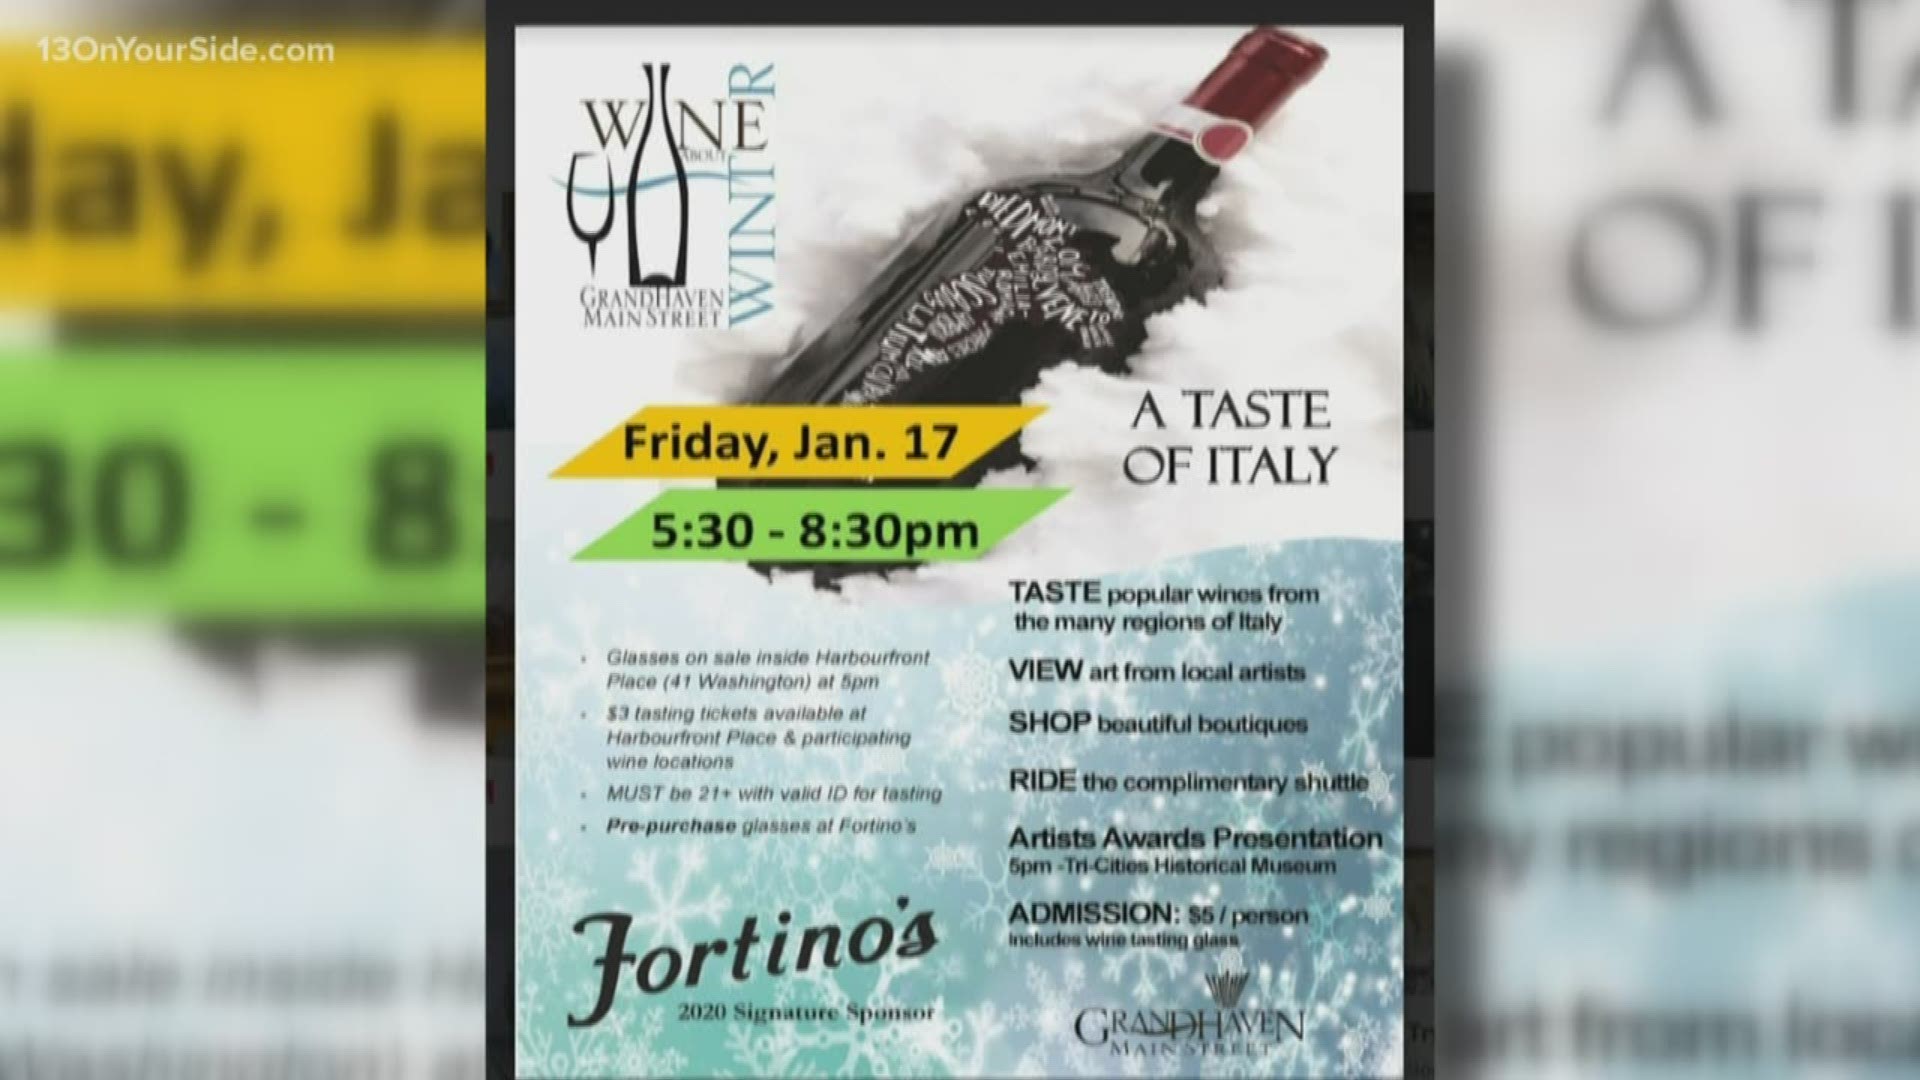 "A Taste of Italy" will be this year's showcase of wines Friday, Jan. 17, 2020.